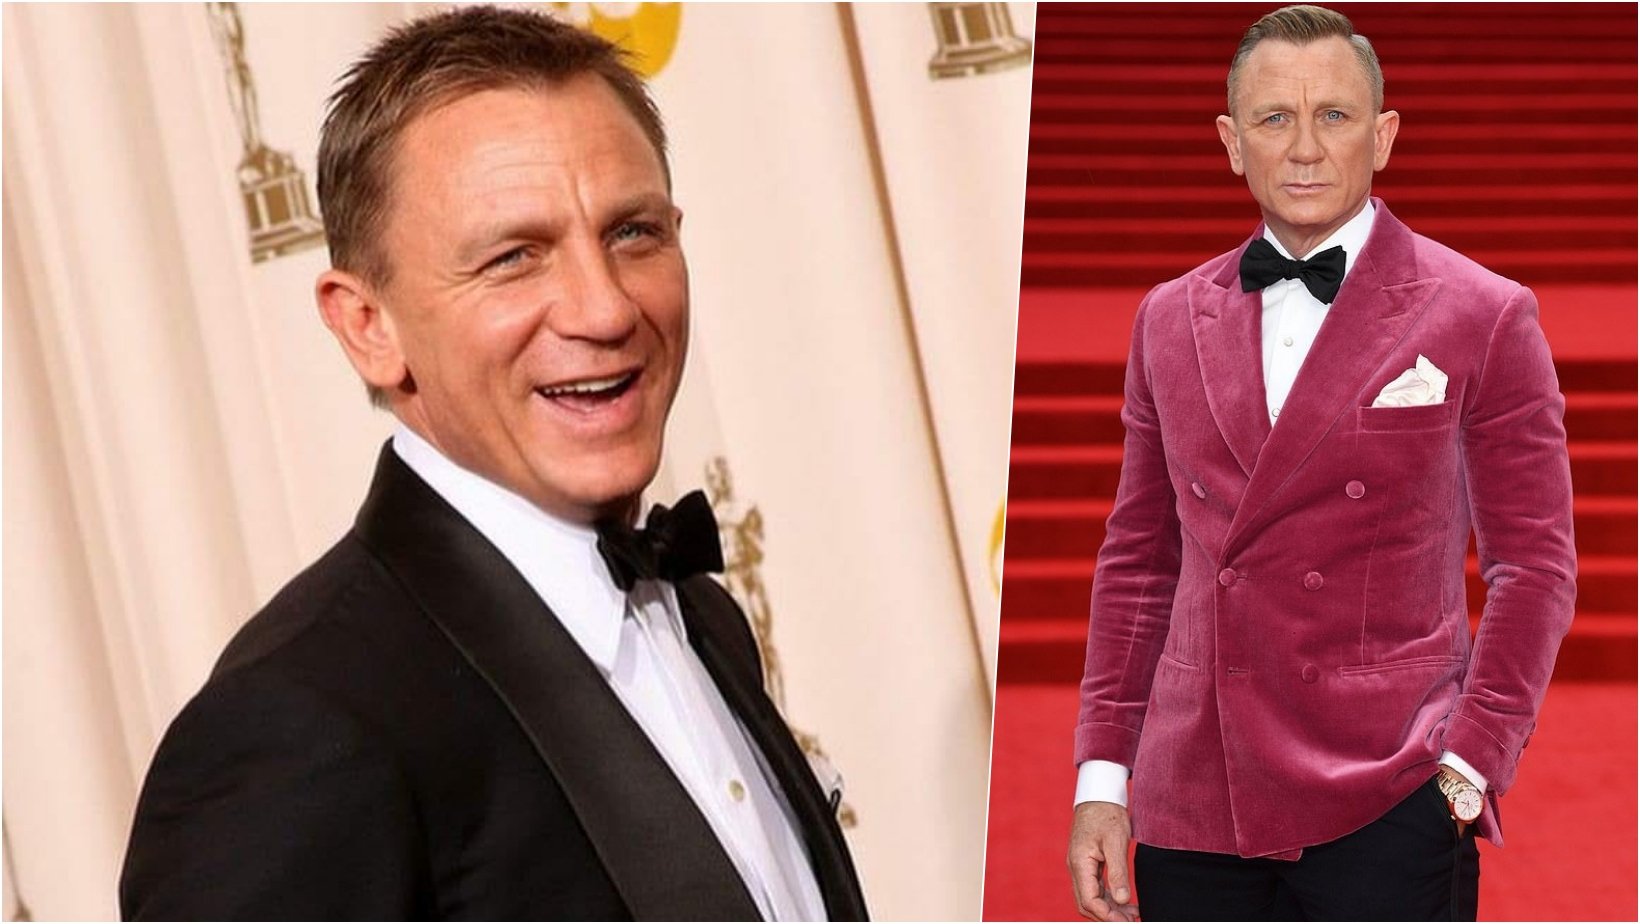 6 facebook cover 19.jpg?resize=1200,630 - James Bond Actor Daniel Craig Reveals The Reason Why He Prefers Going To Gay Bars During A Night Out